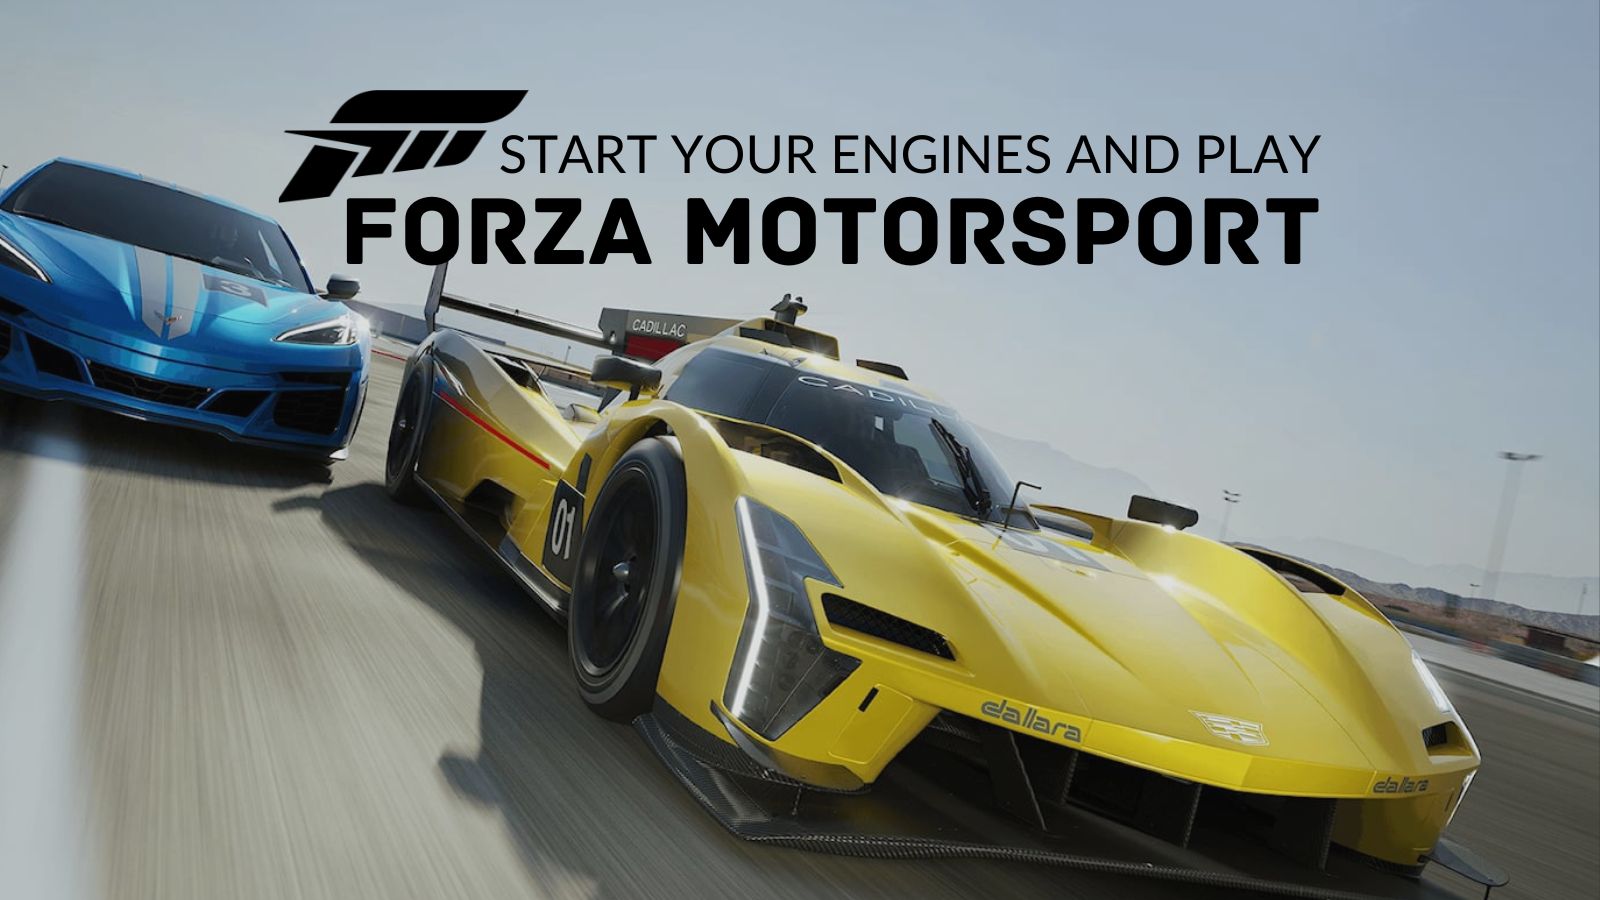 Feel the Road Beneath Your Wheels in Forza Motorsport with